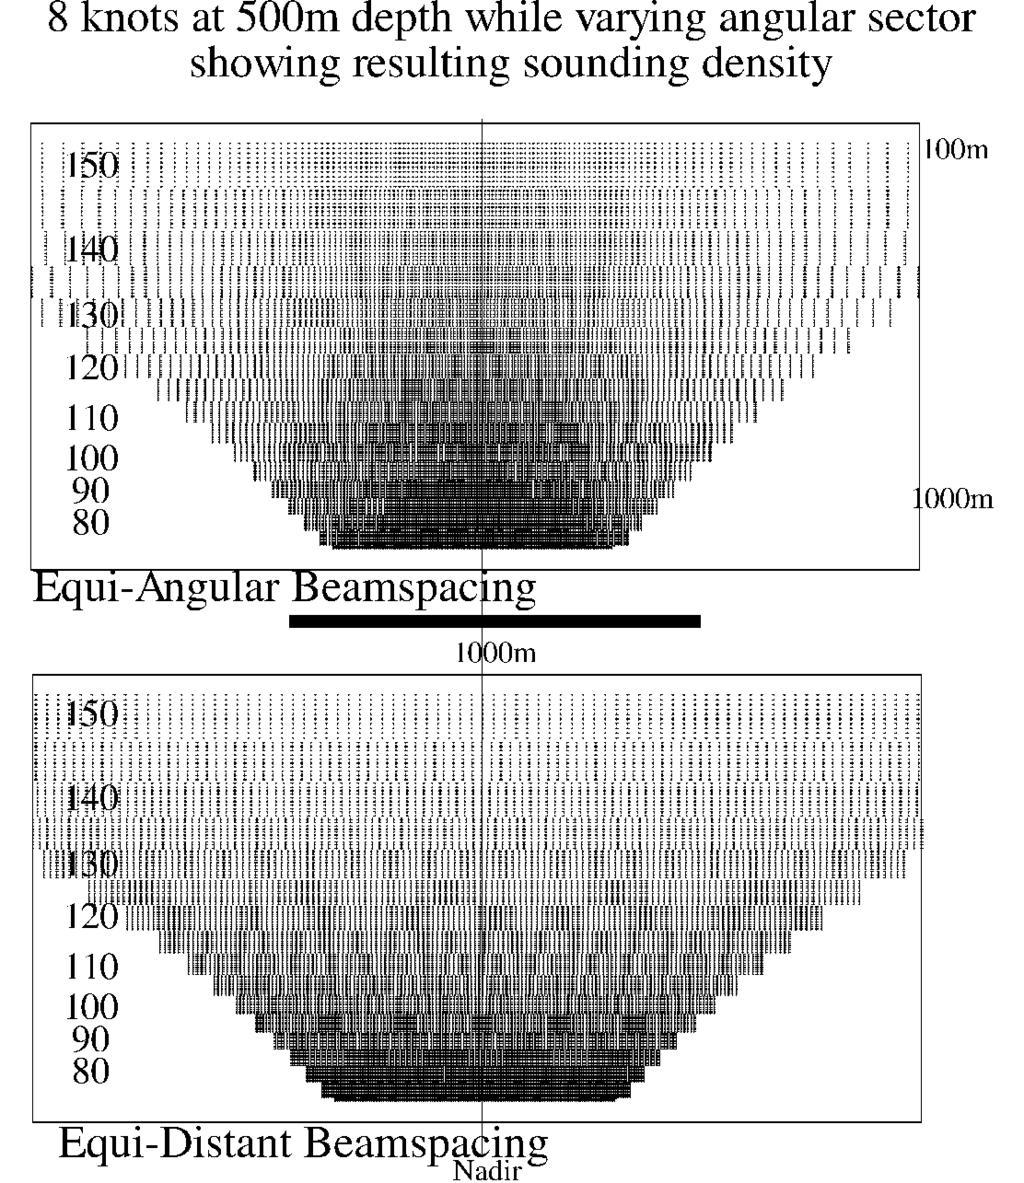 Figure 1a: 150deg swath, 10 knots, SeaState 5, 500m depth Simulation without multi-sector yaw stabilisation Figure 1b: 150deg swath, 10 knots, SeaState 5, 500m depth Simulation with multi-sector yaw